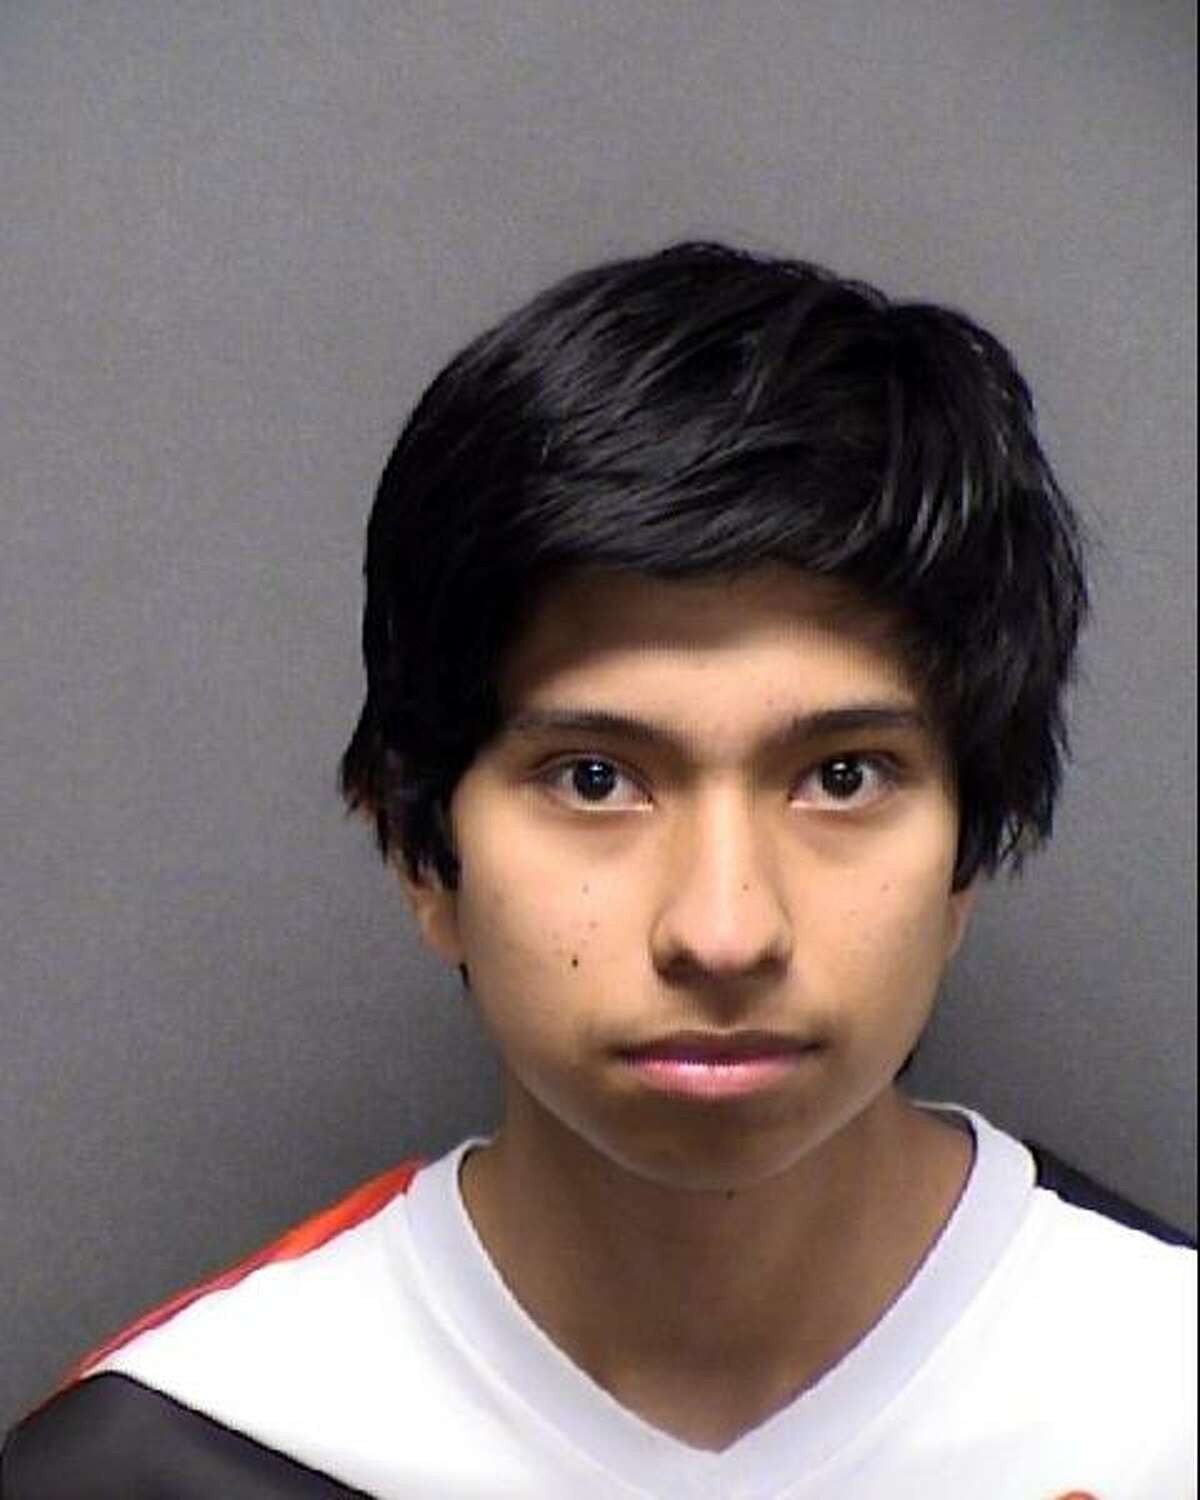 Alejandro Richard Velasquez Gomez is charged with making interstate threats and possessing child pornography.